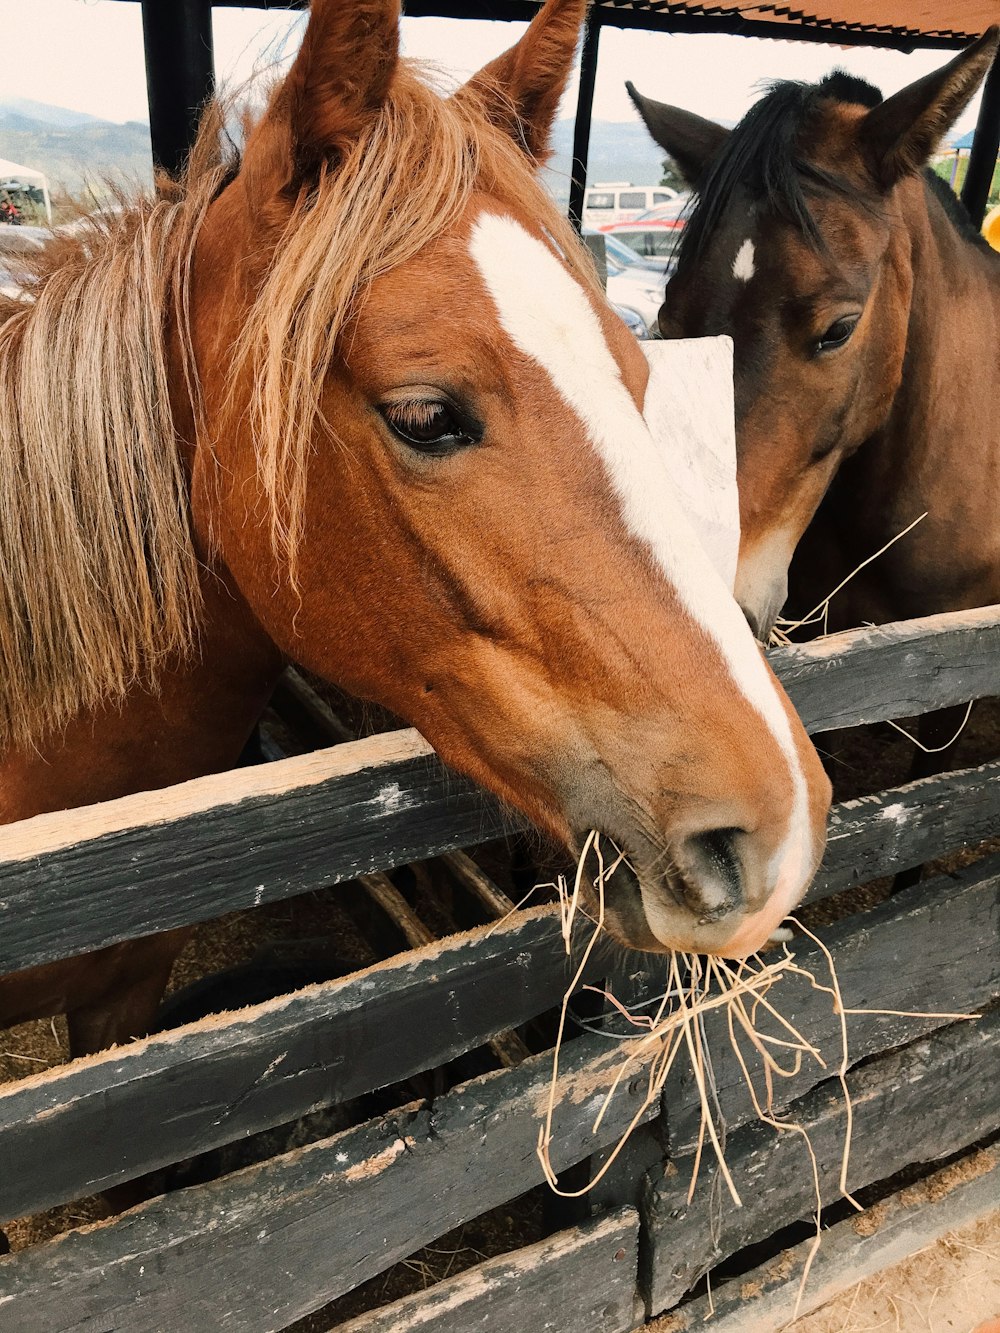 two horses in a pen with hay in their mouths